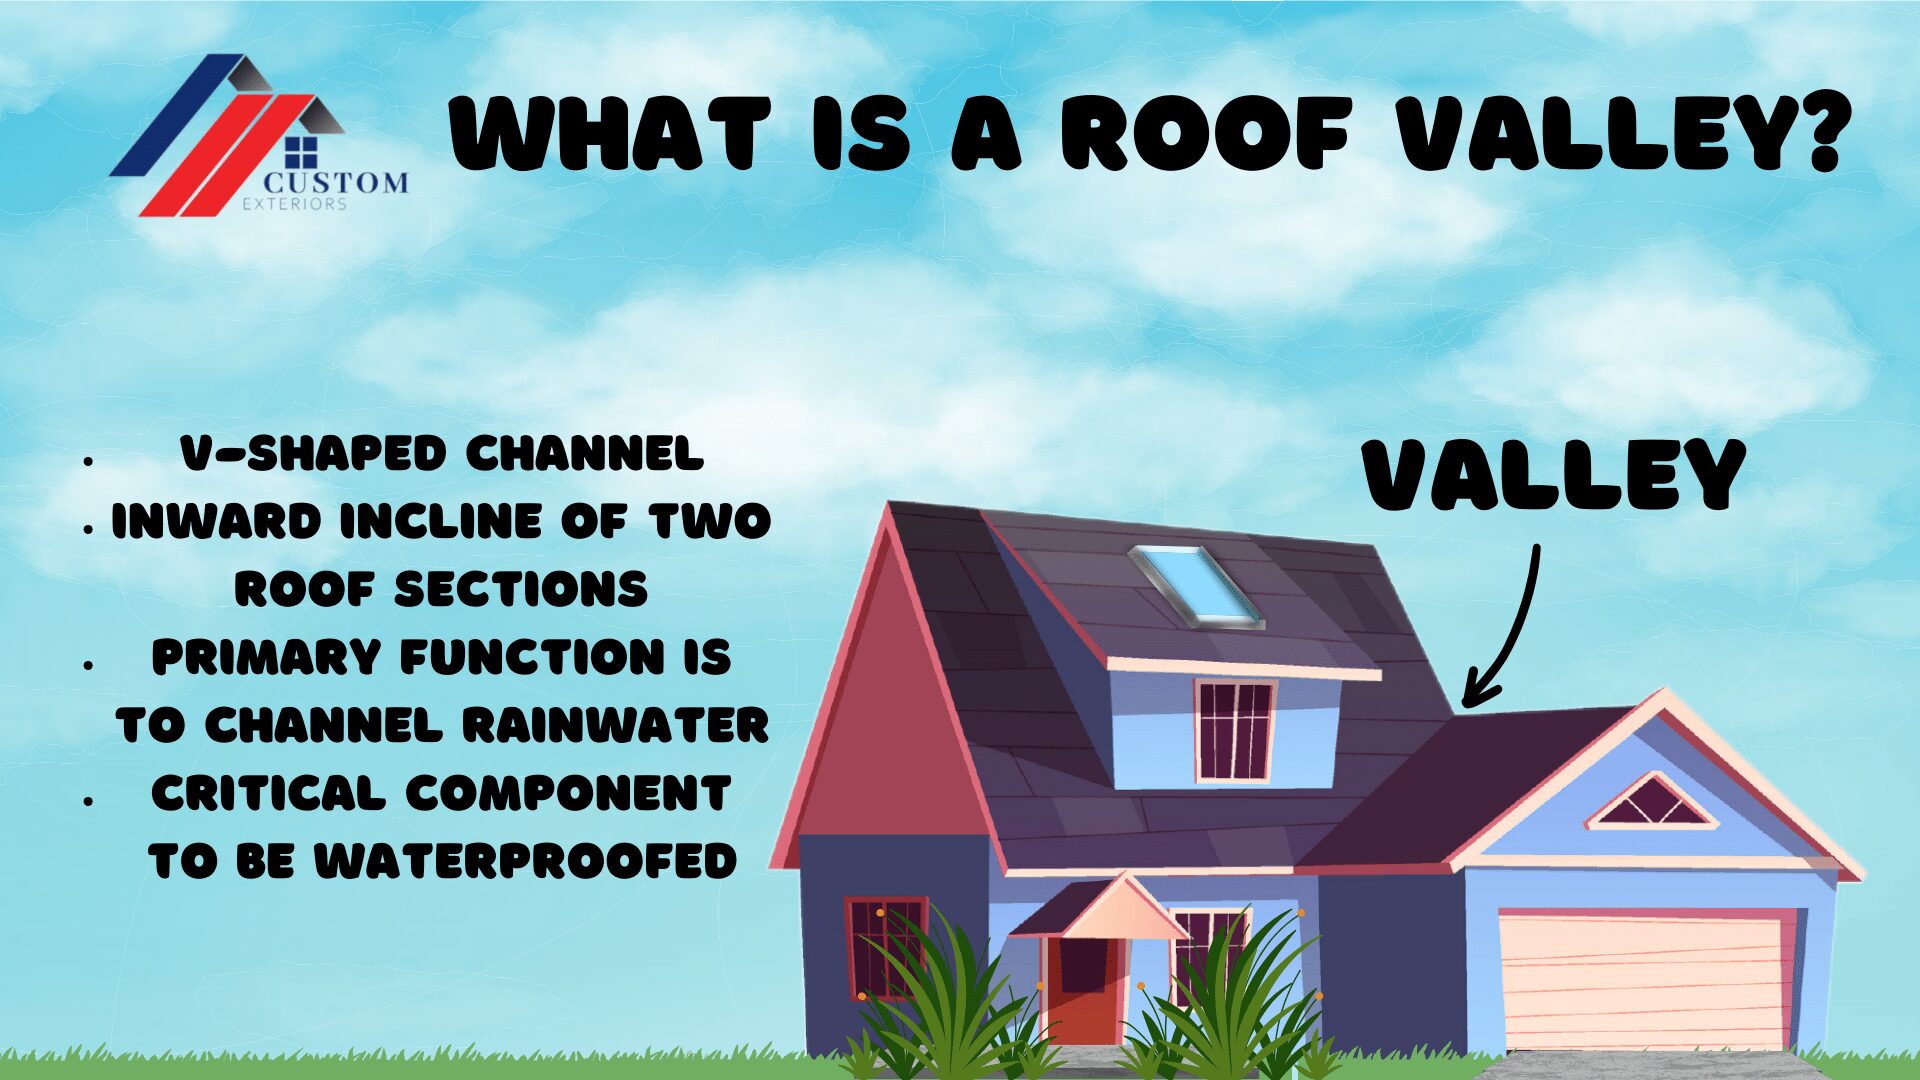 Infographic explaining what a roof valley